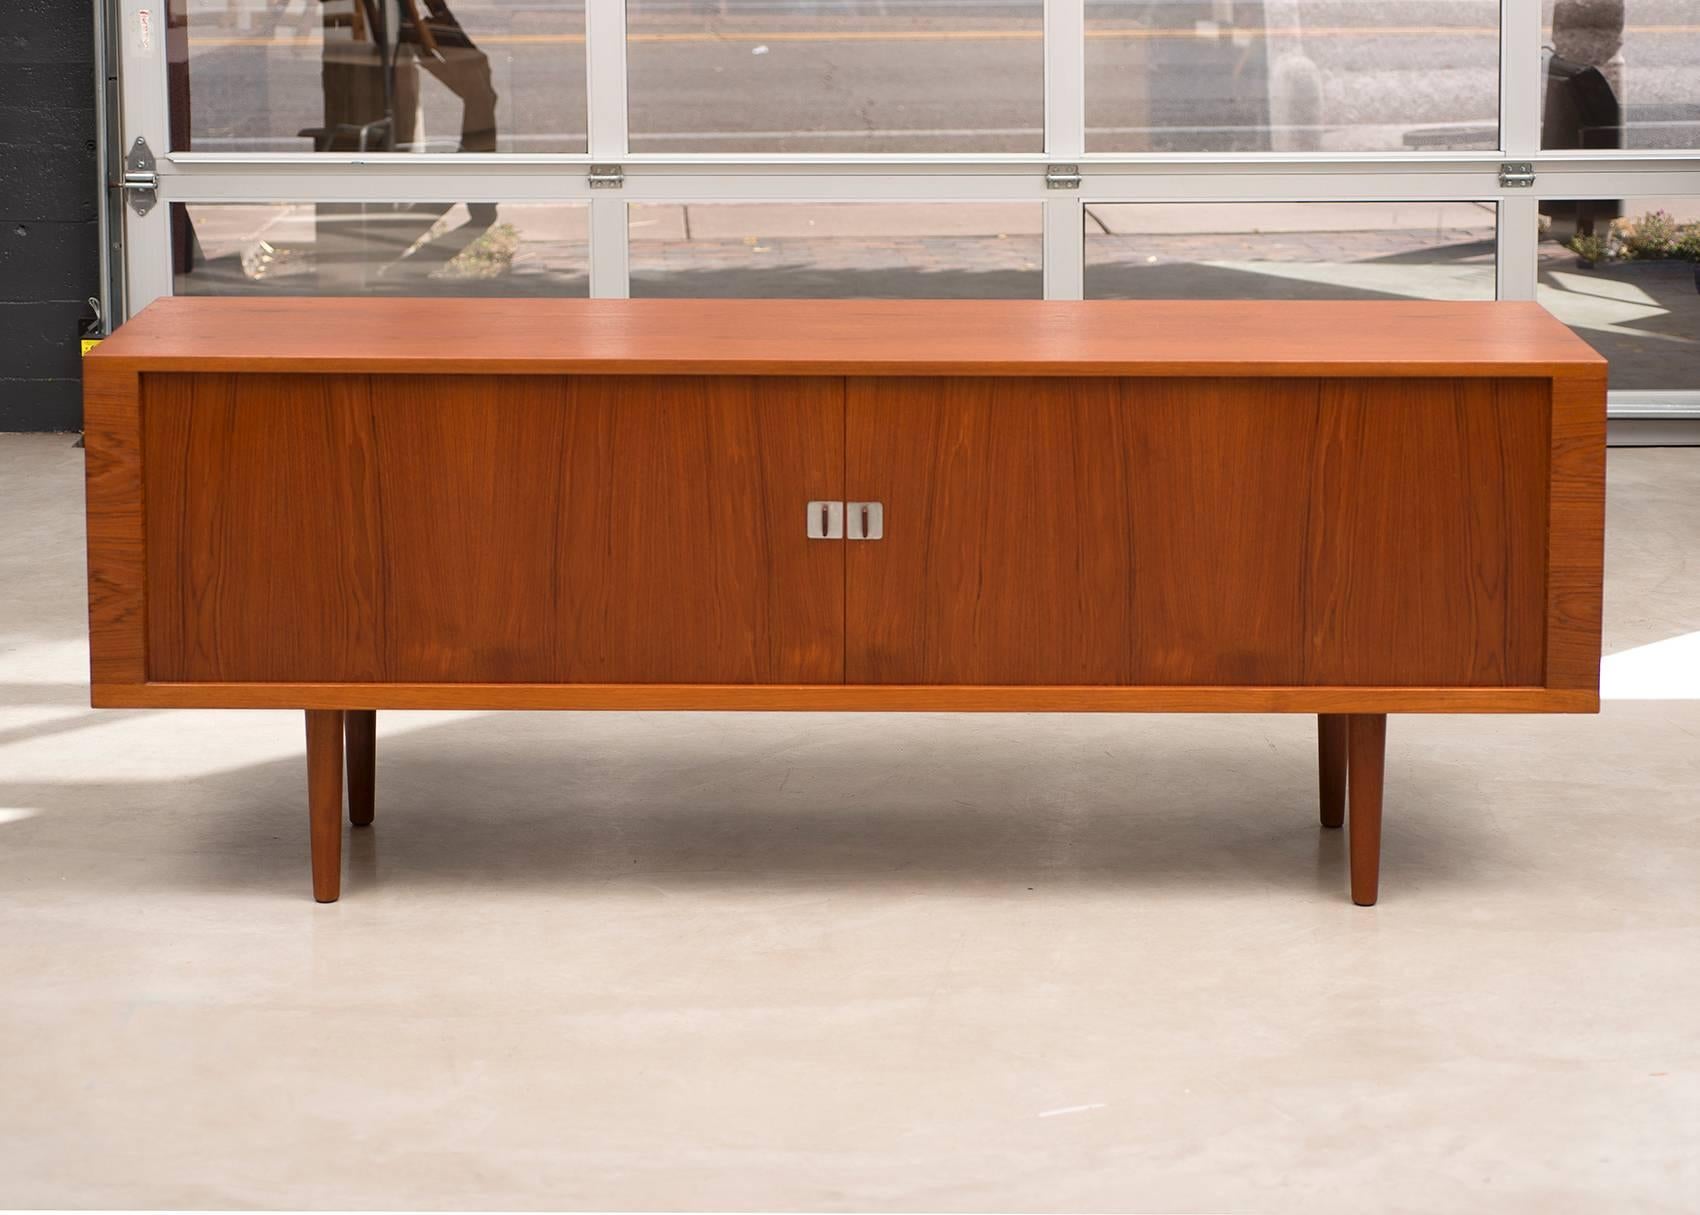 Large teak tambour door credenza with oak interior shelves and drawers, Model RY-25. Produced by Ry Mobler, Denmark, 1960s.